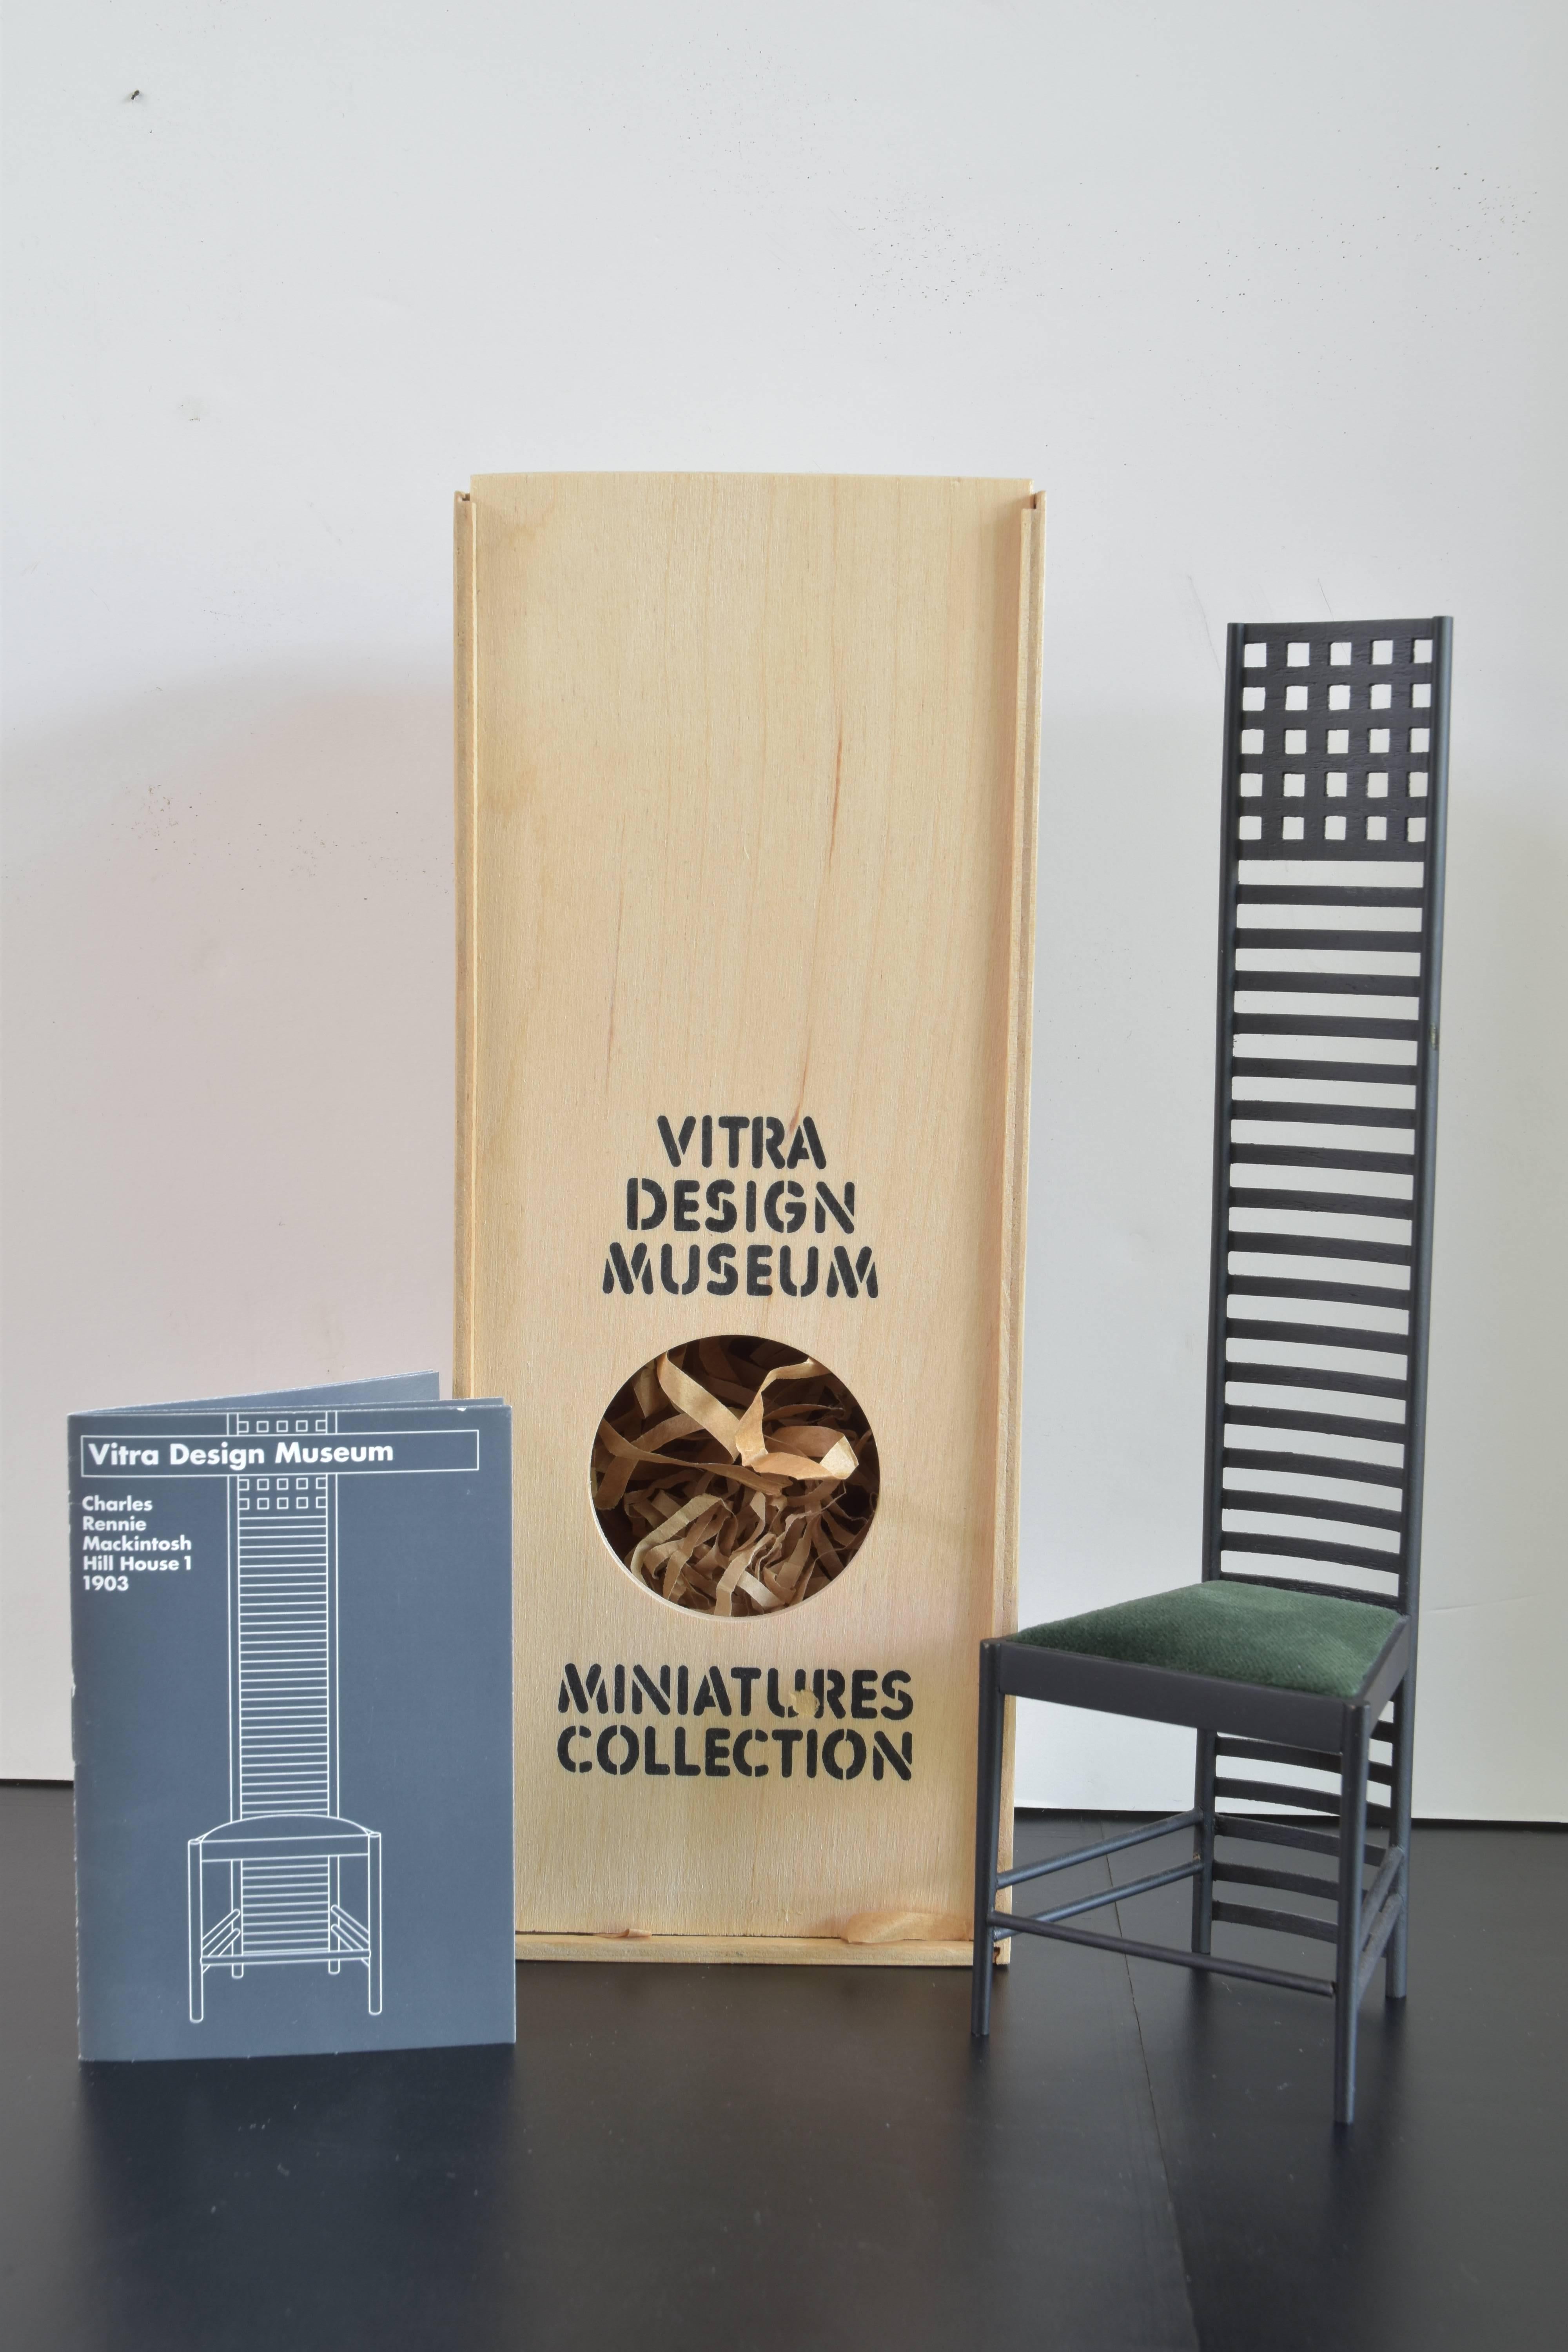 From the Vitra Design Museum collection of miniatures a charming model of the original Charles Rennie Mackintosh Hill House 1 chair from 1903.

Included with the model chair is the original box and historical narrative as noted below:

Charles